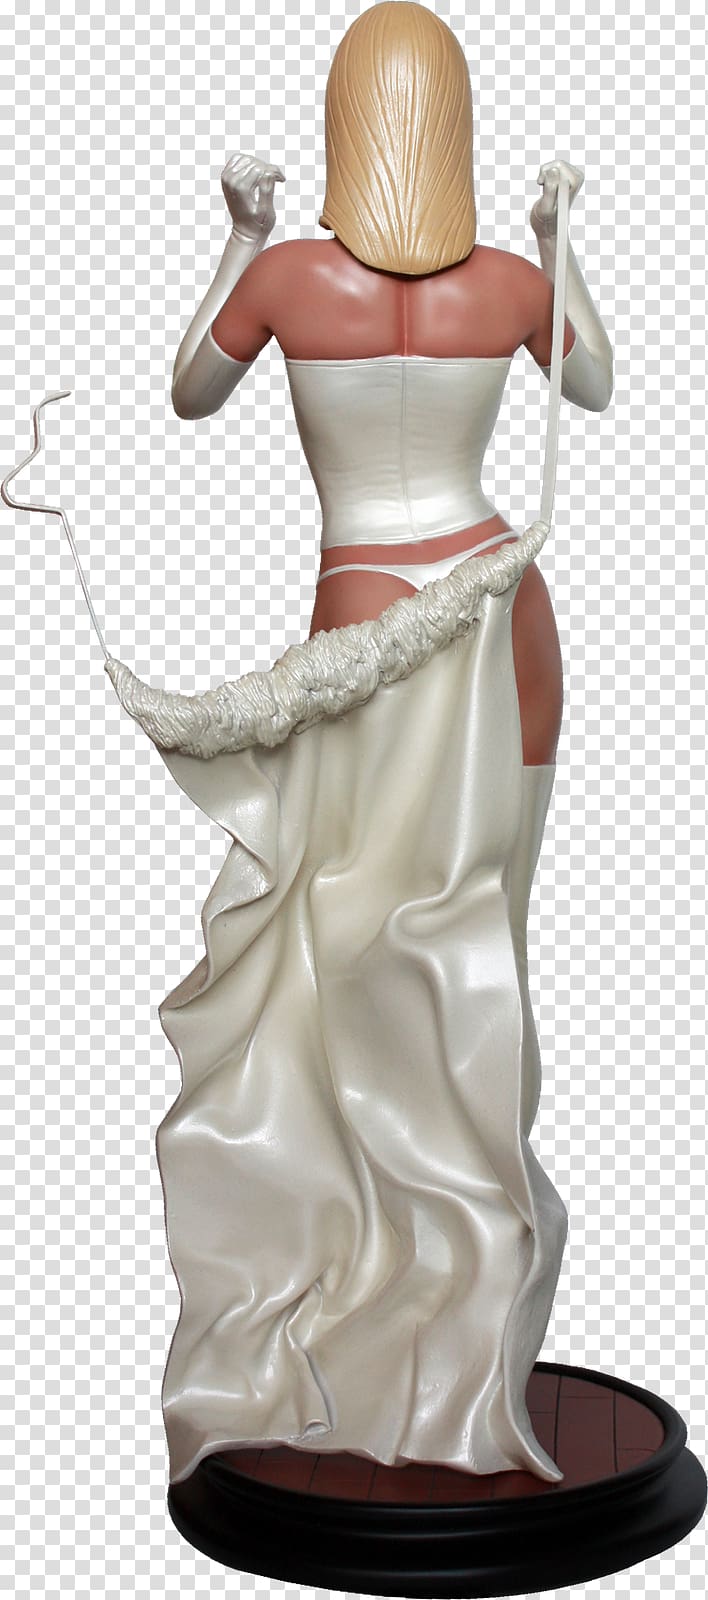 Classical sculpture Figurine Statue Emma Frost, others transparent background PNG clipart